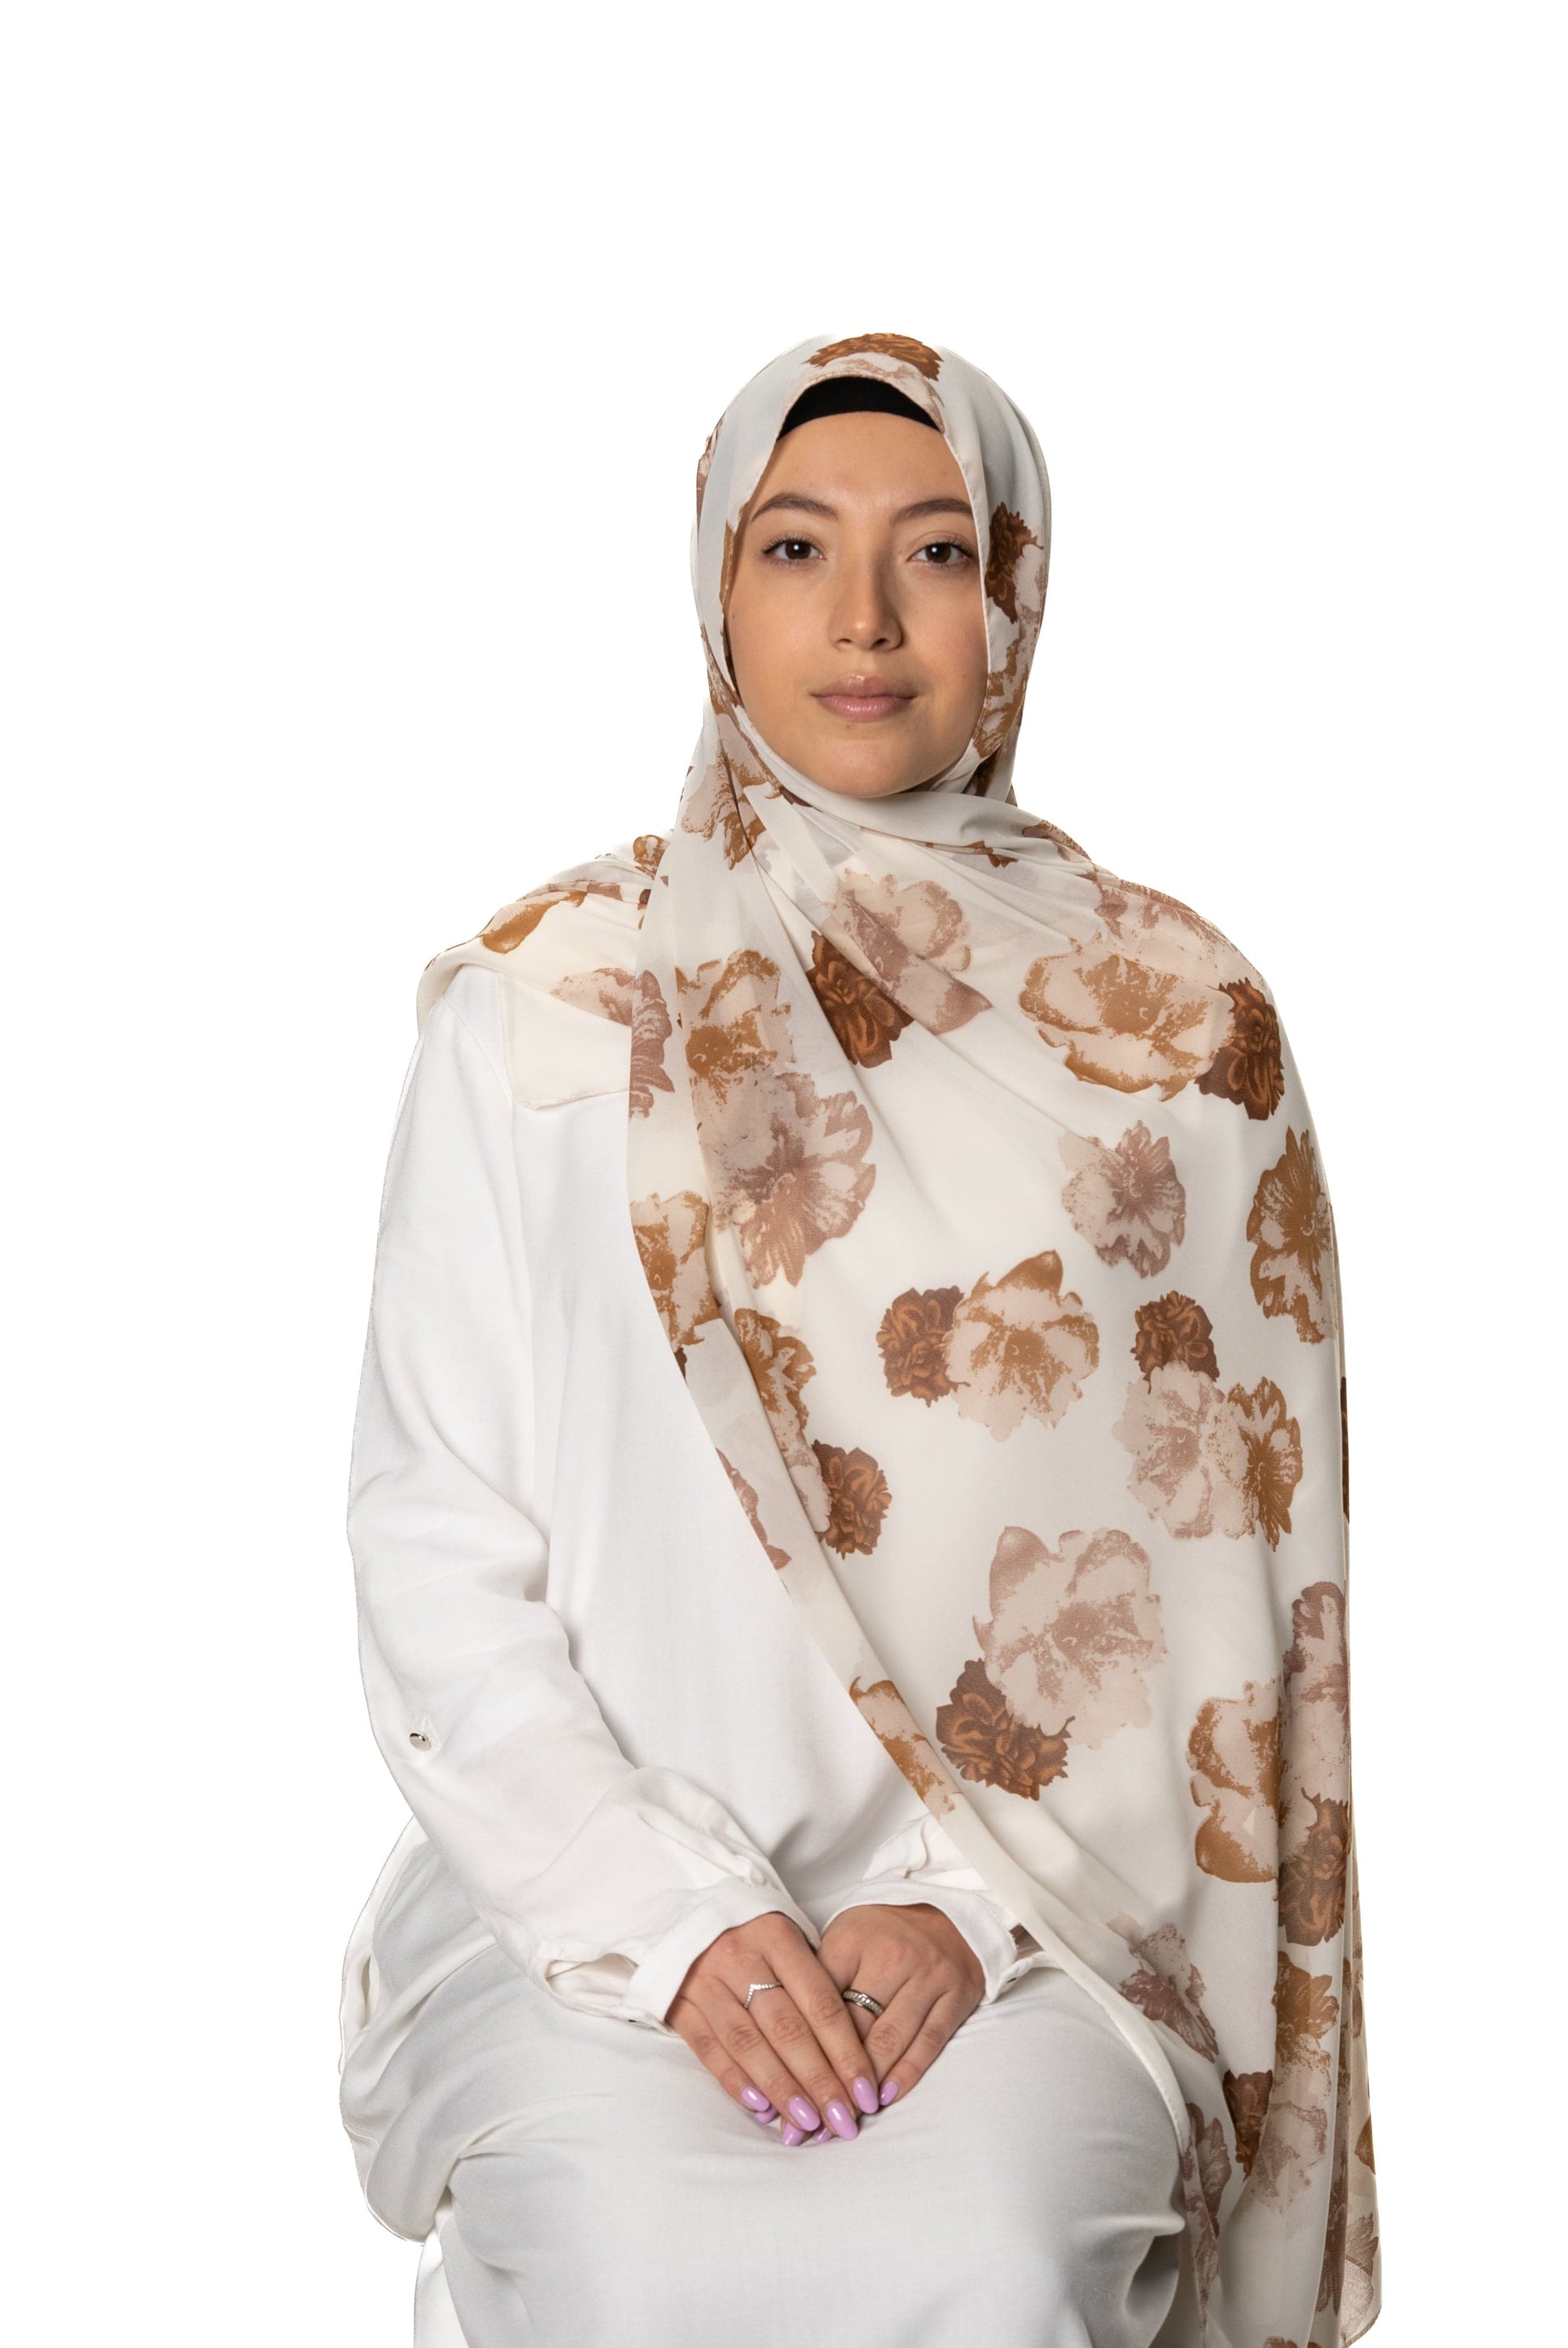 Jolie Nisa Hijab Elevate Your Style with Jolie Nisa Non-Slip Printed Chiffon Hijabs - Elegant, Comfortable, and Secure Hijabs for Women